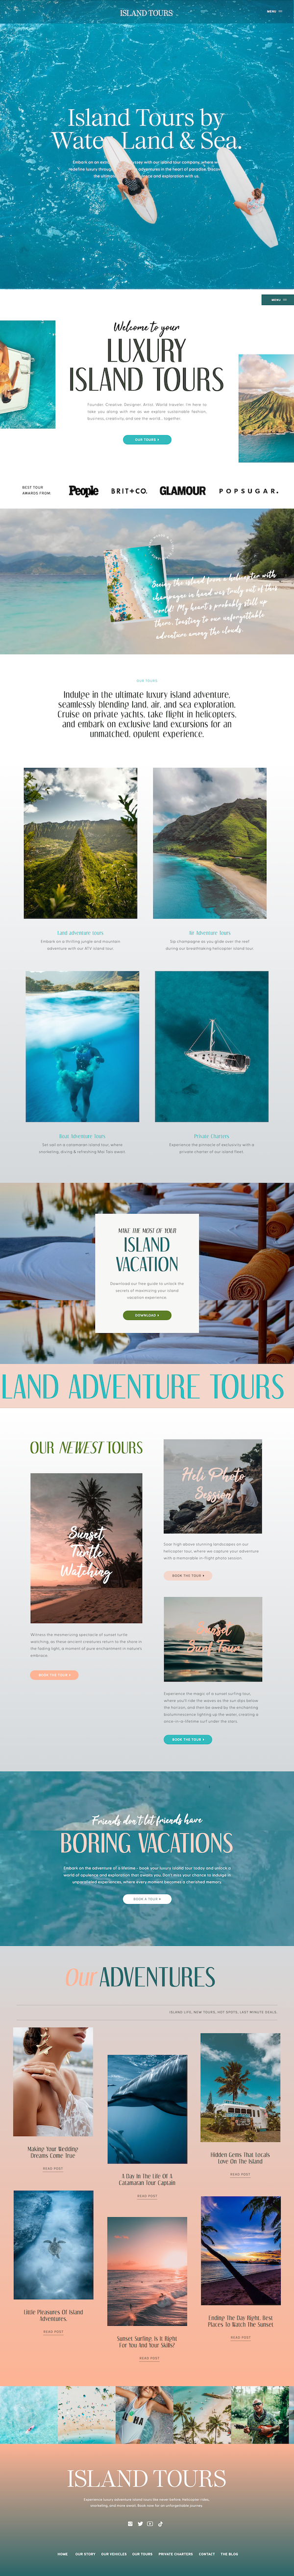 islandtours-showitpreview-home-2023-09-08-13_28_41